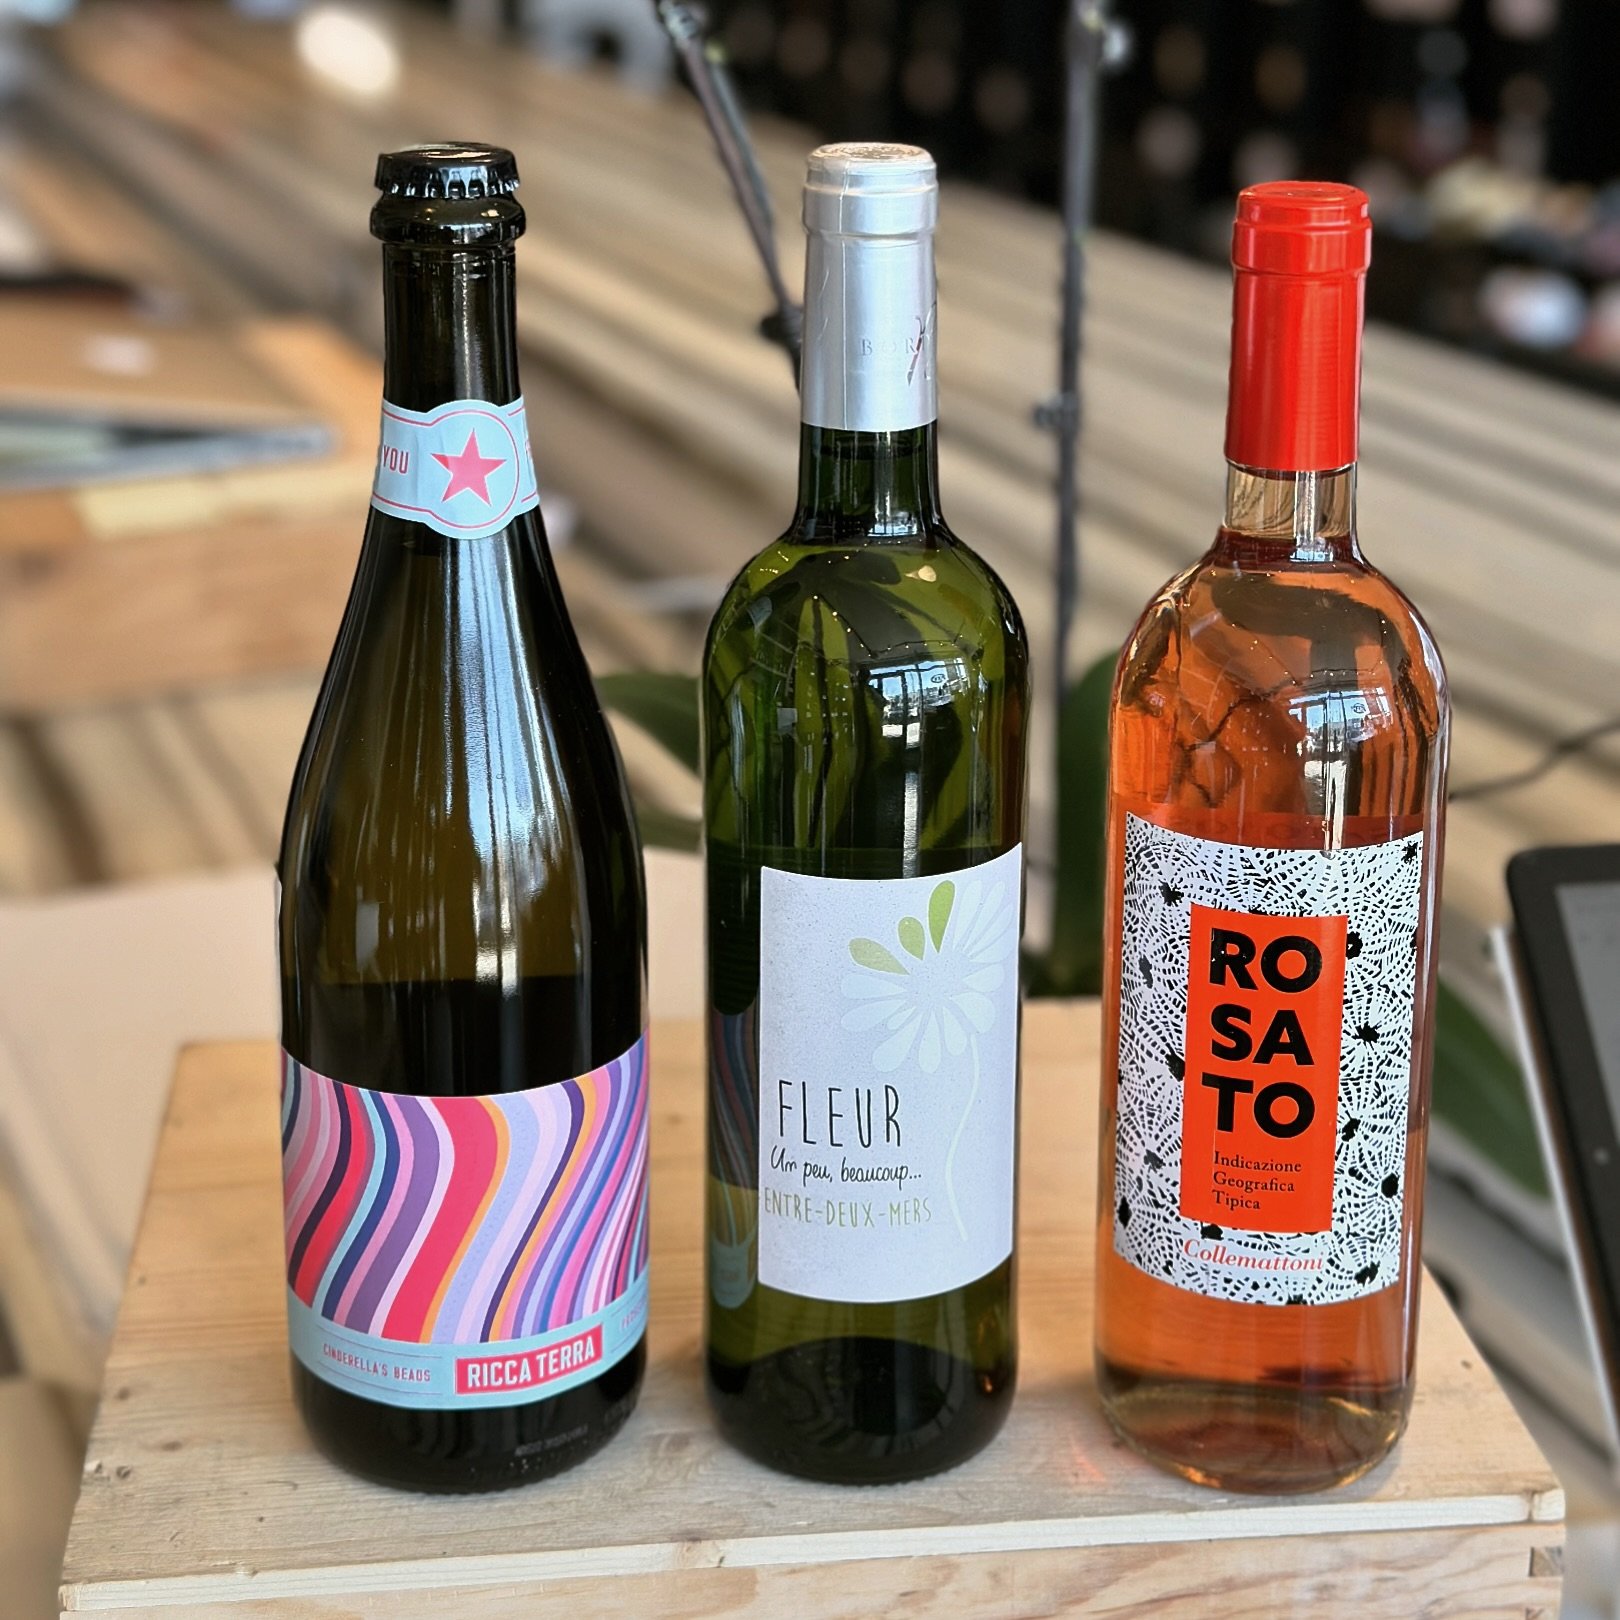 Looking for the perfect last minute Mother&rsquo;s Day gift? We have a bundle of bubbles, ros&egrave; and white wine all wrapped up for Mom for $65. Available at both Jwebb West Springs and The Wine Shop in Glenmore Landing. 

#thewineshop #jwebb #yy